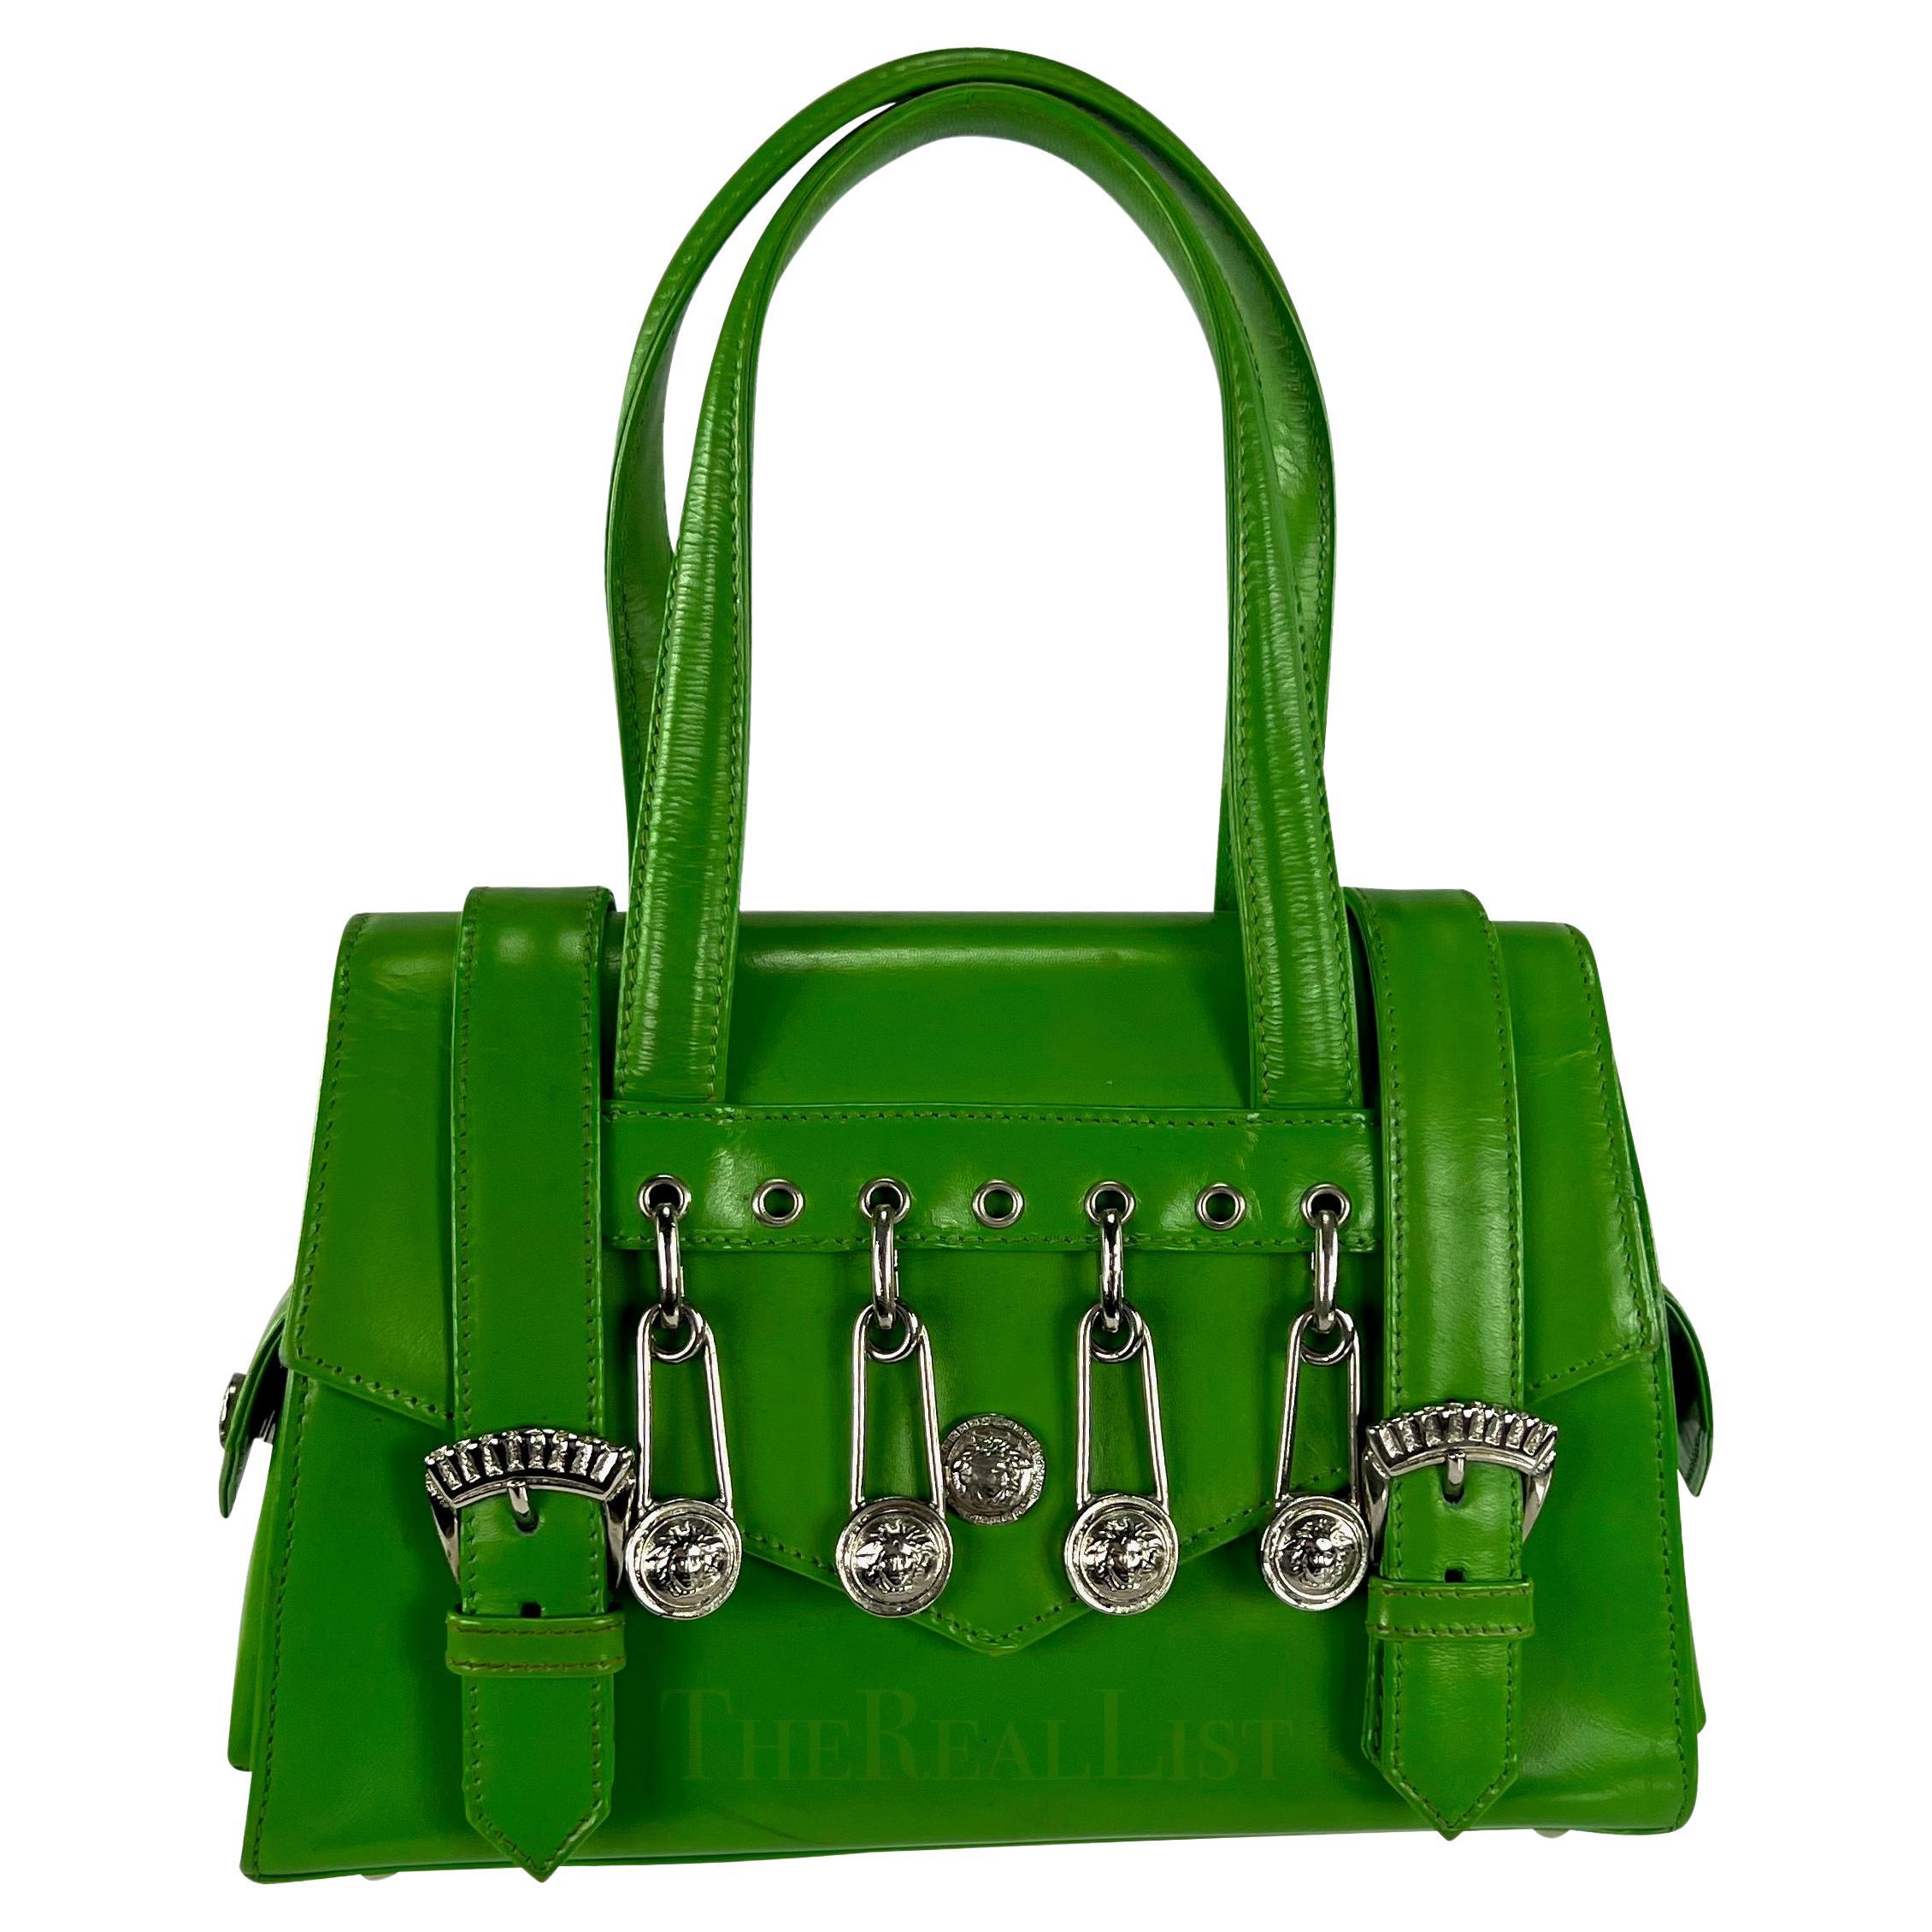 S/S 1994 Gianni Versace Vintage Mini Green Leather Safety Pin Bag For Sale